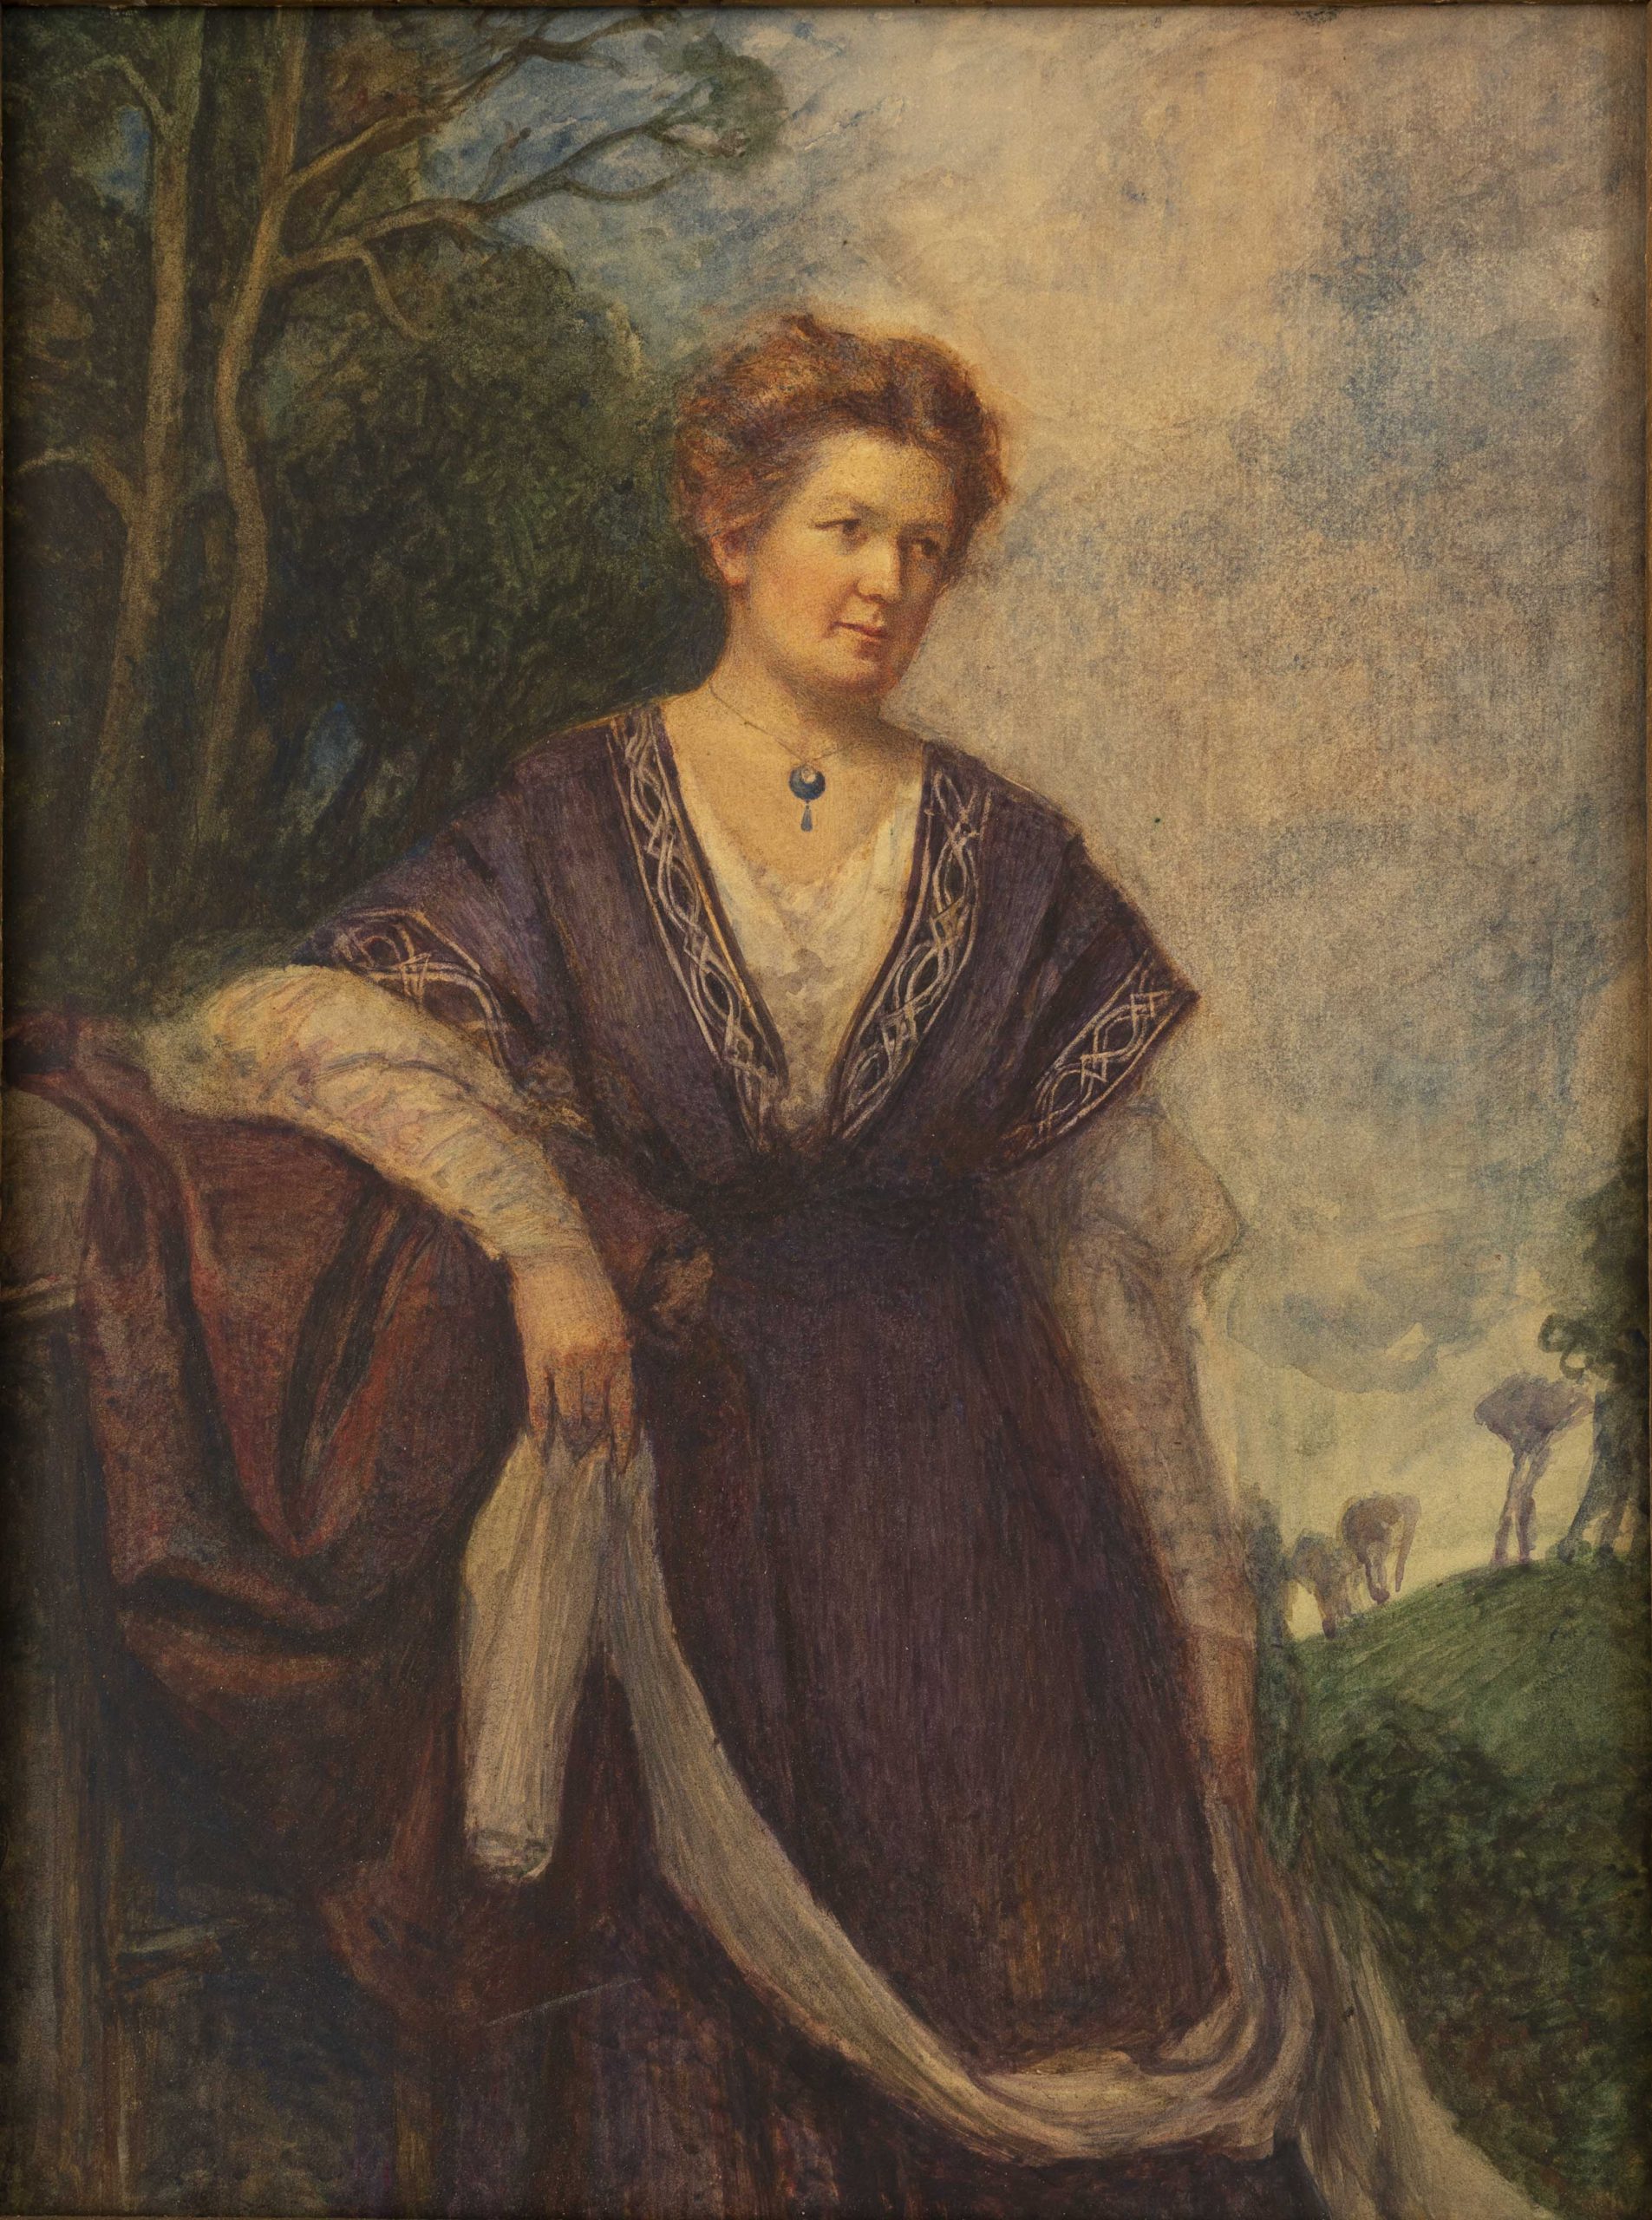 Portrait of Lady Mabel Faithfull, wearing a purple dress, with a landscape background